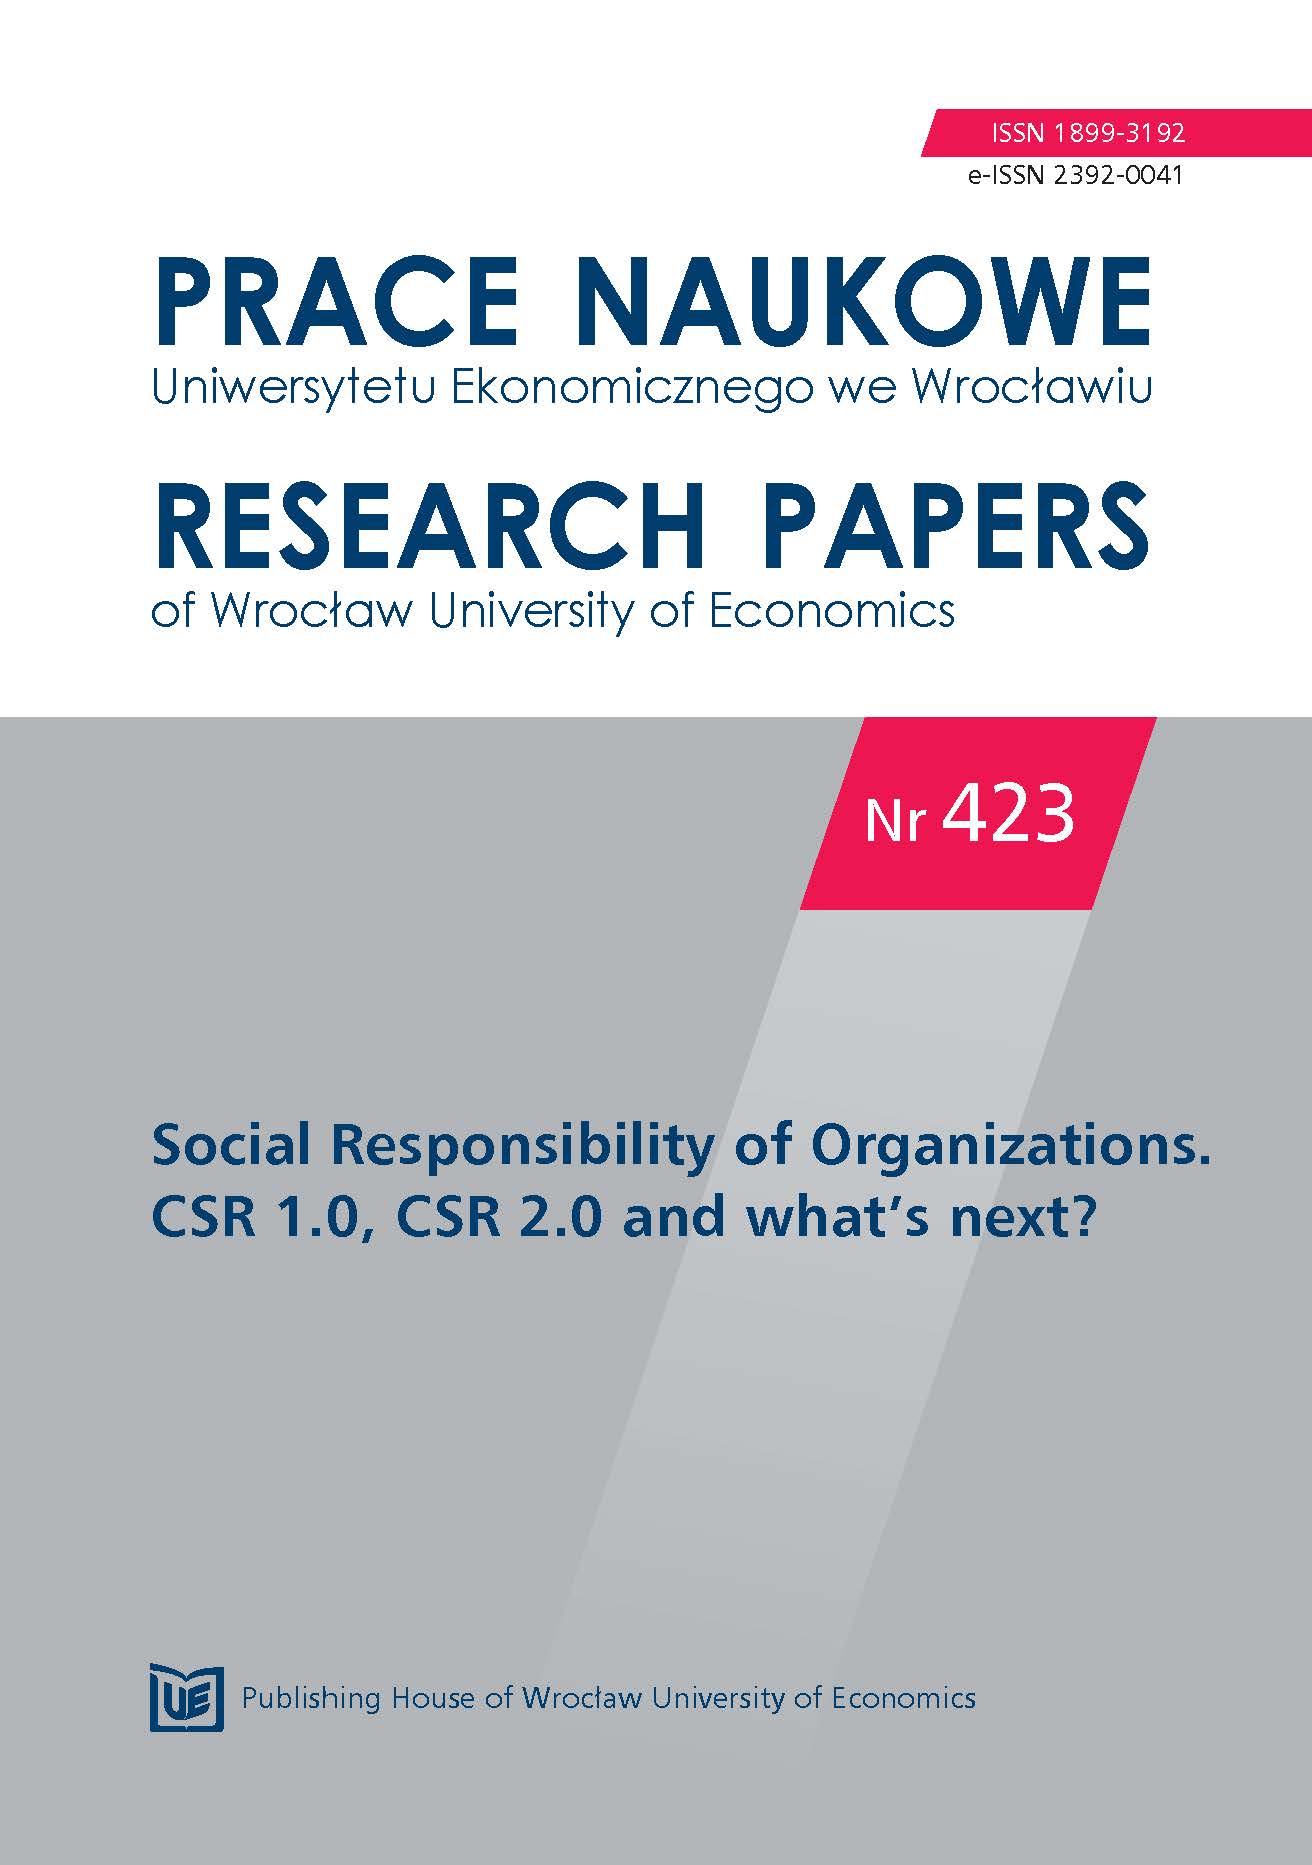 Acquaintance with the fair trade idea in Poland – results of the research Cover Image